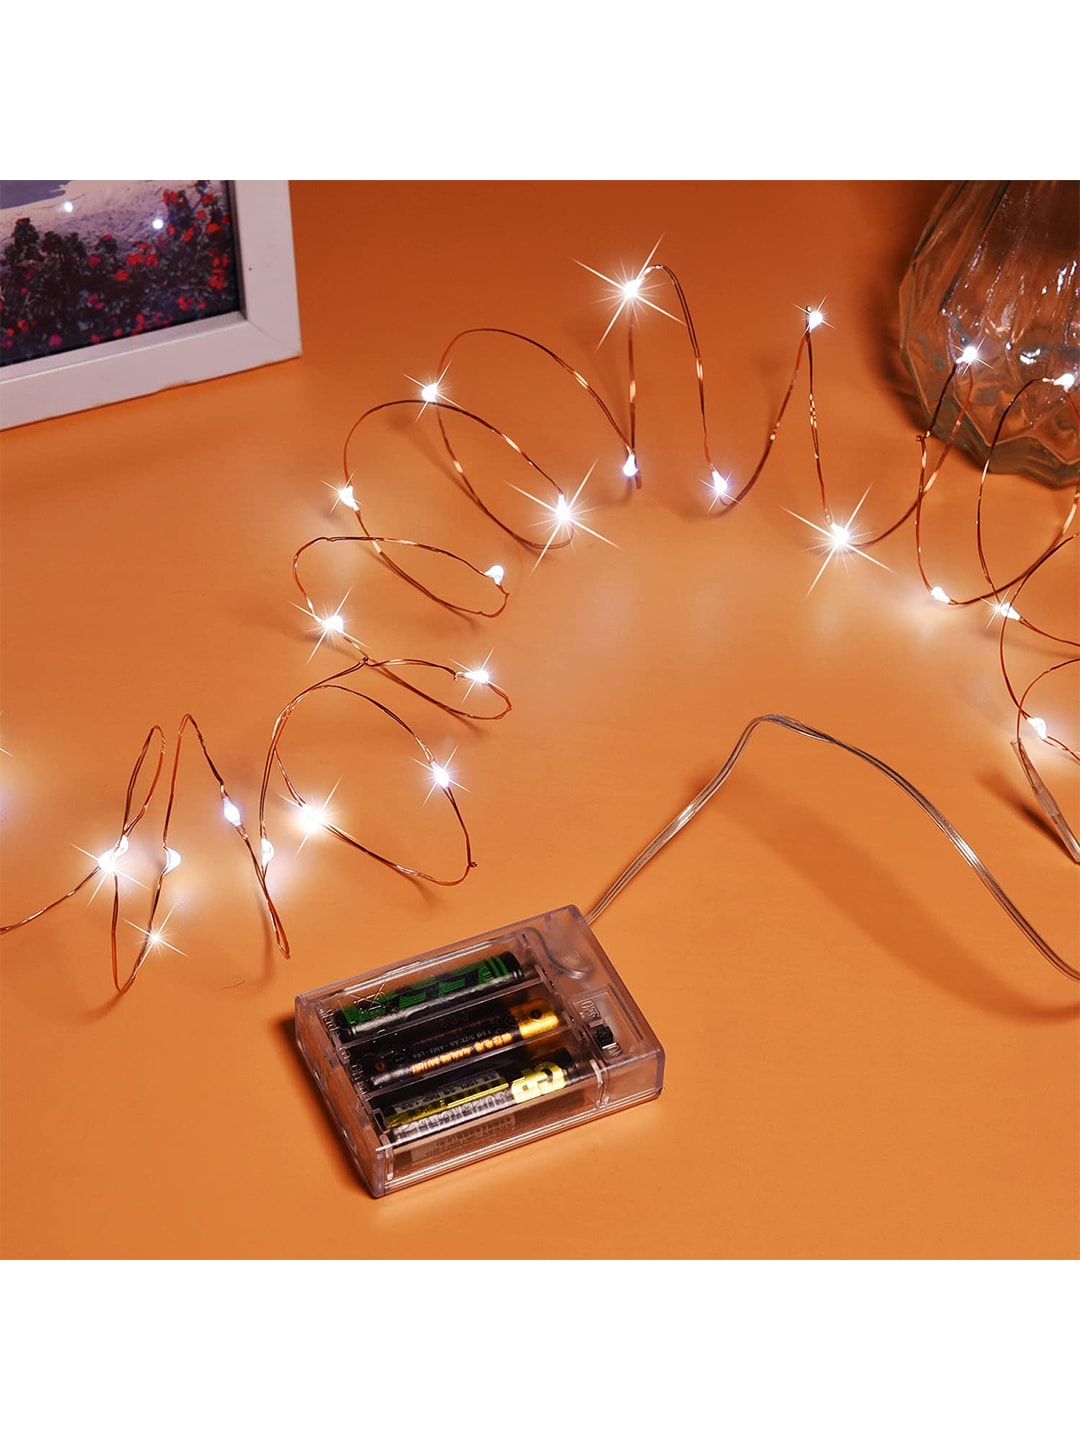 XERGY 100 LED White AA Battery Powered Copper Wire String Lights -10 Meter Price in India